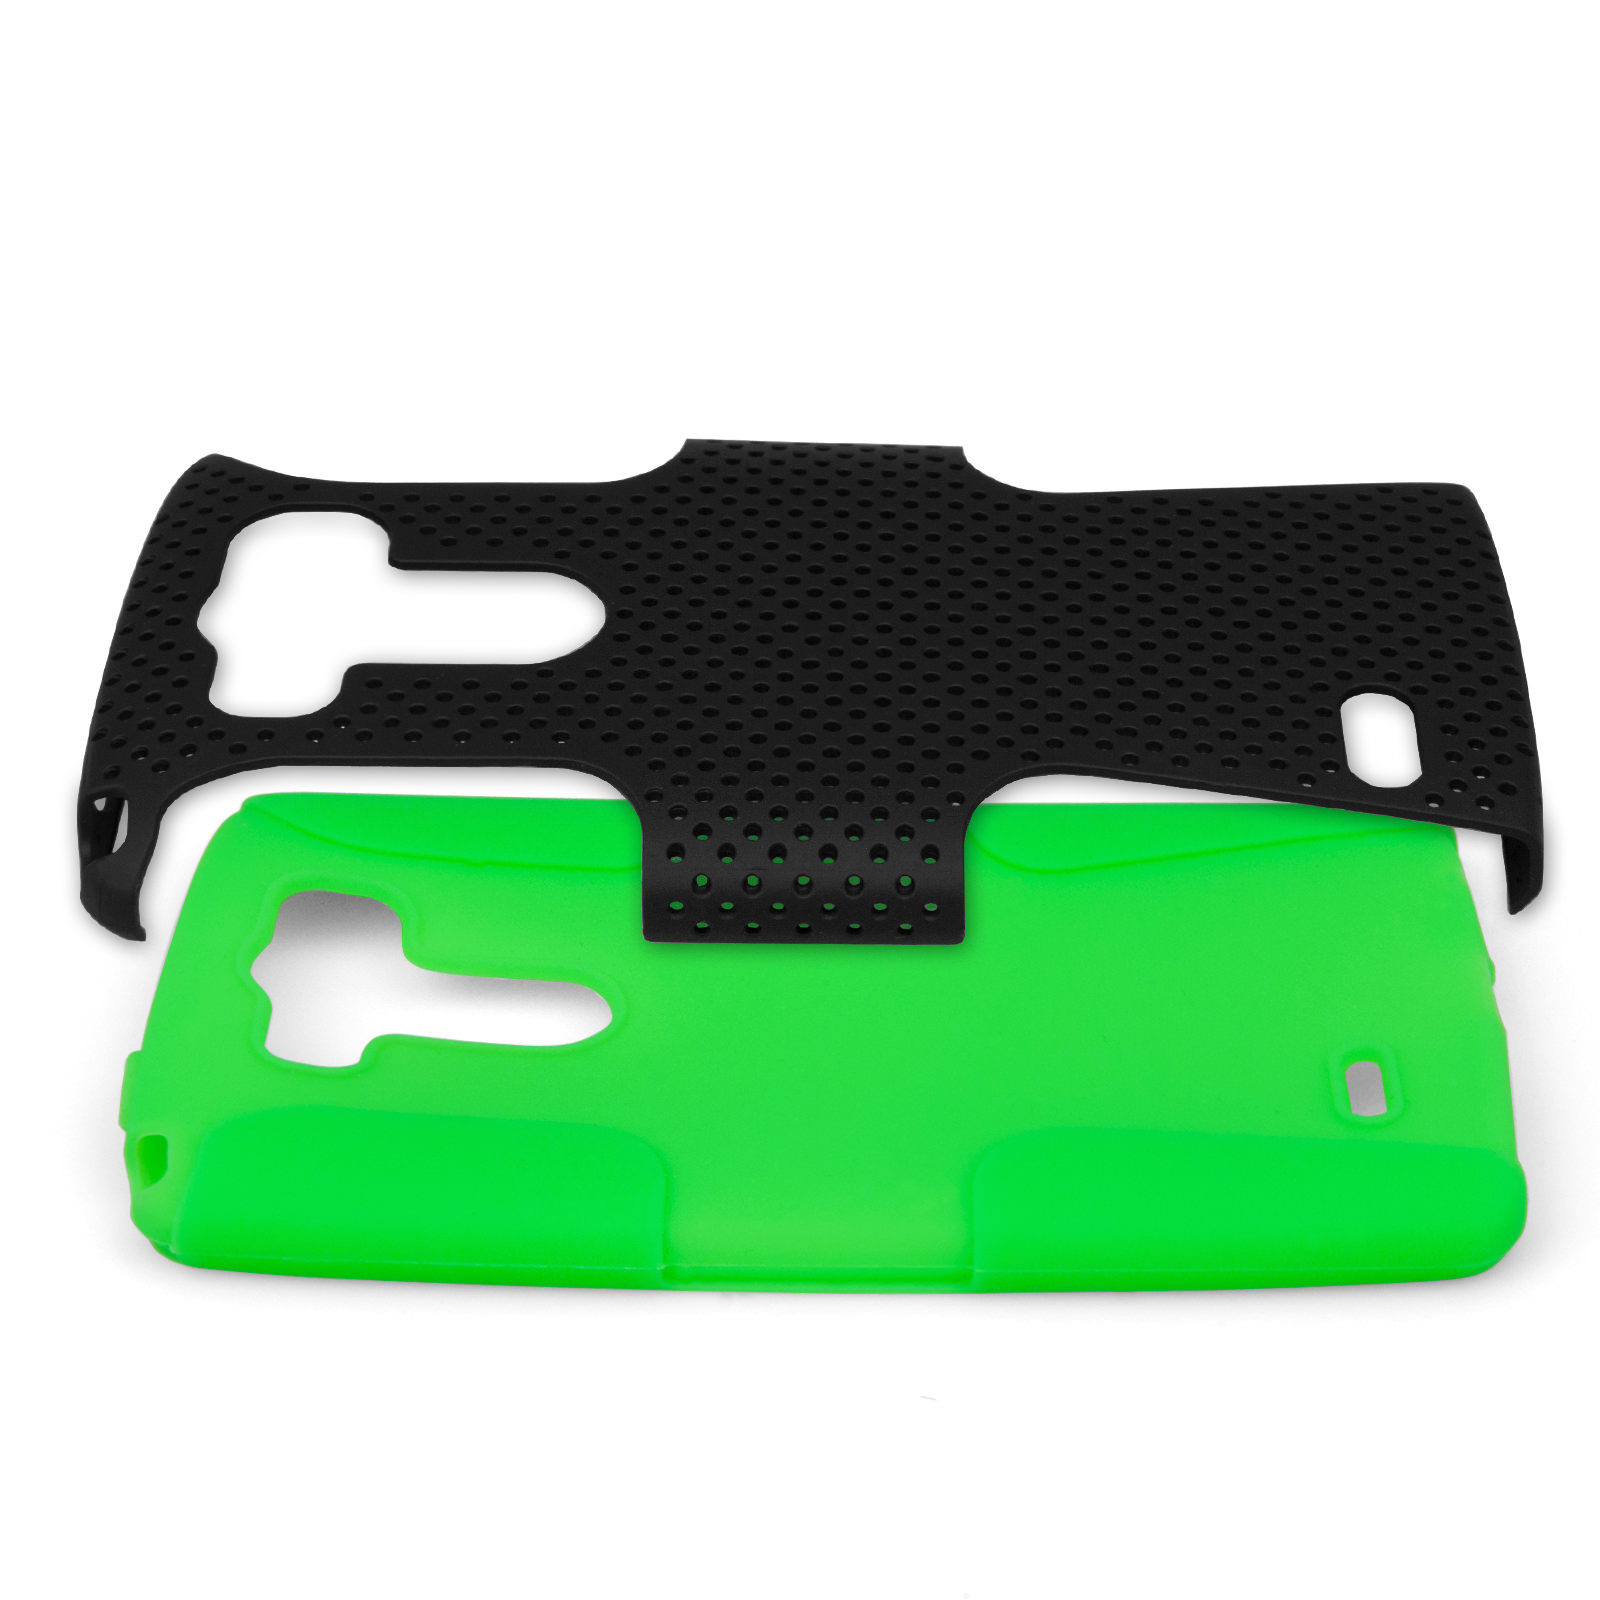 YouSave Accessories LG G3 Tough Mesh Combo Silicone Case - Green-Black